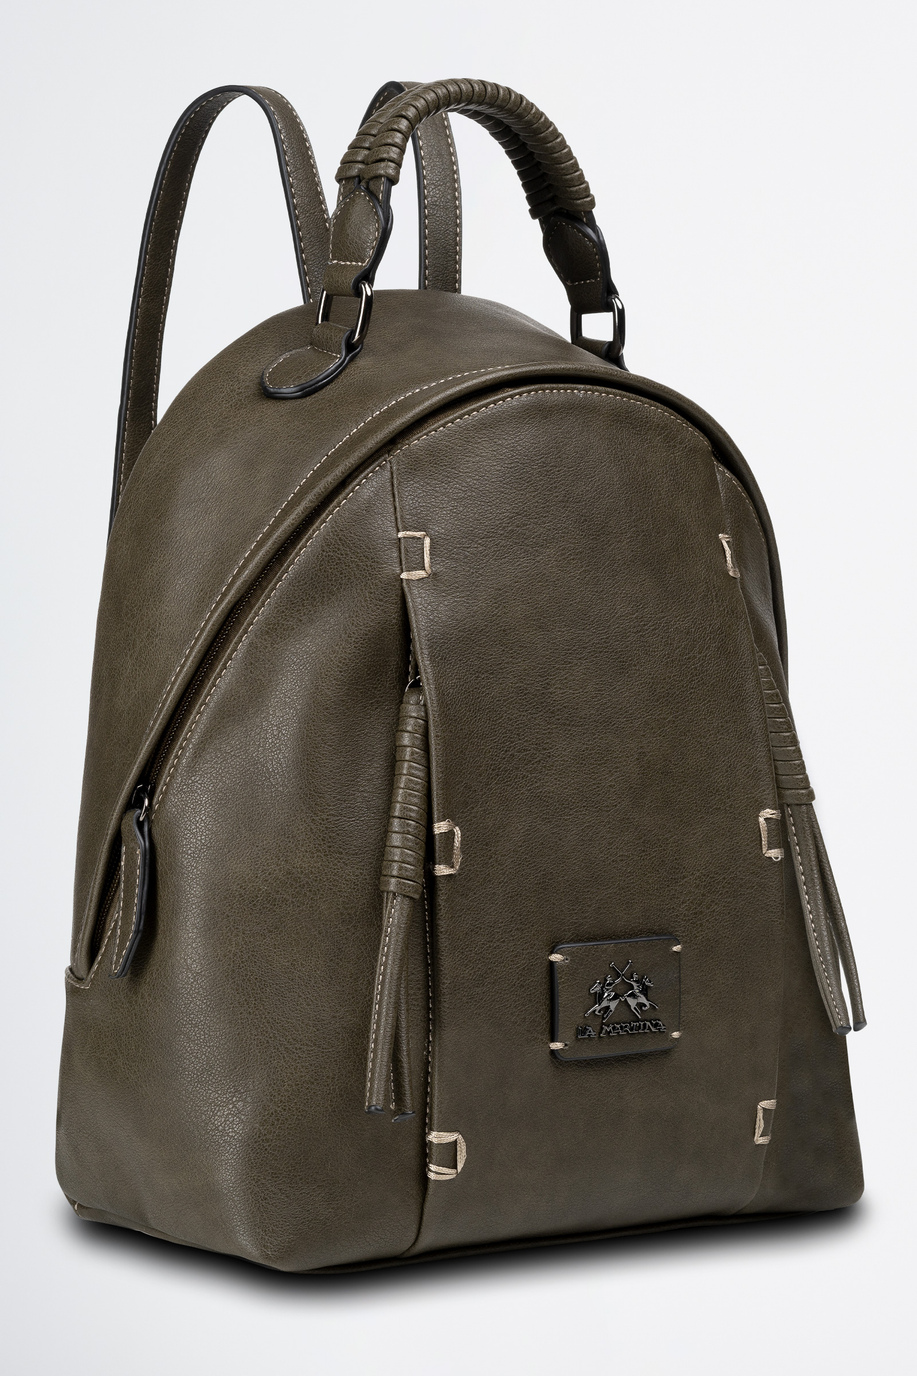 Backpack in aged PU fabric - Woman leather goods | La Martina - Official Online Shop